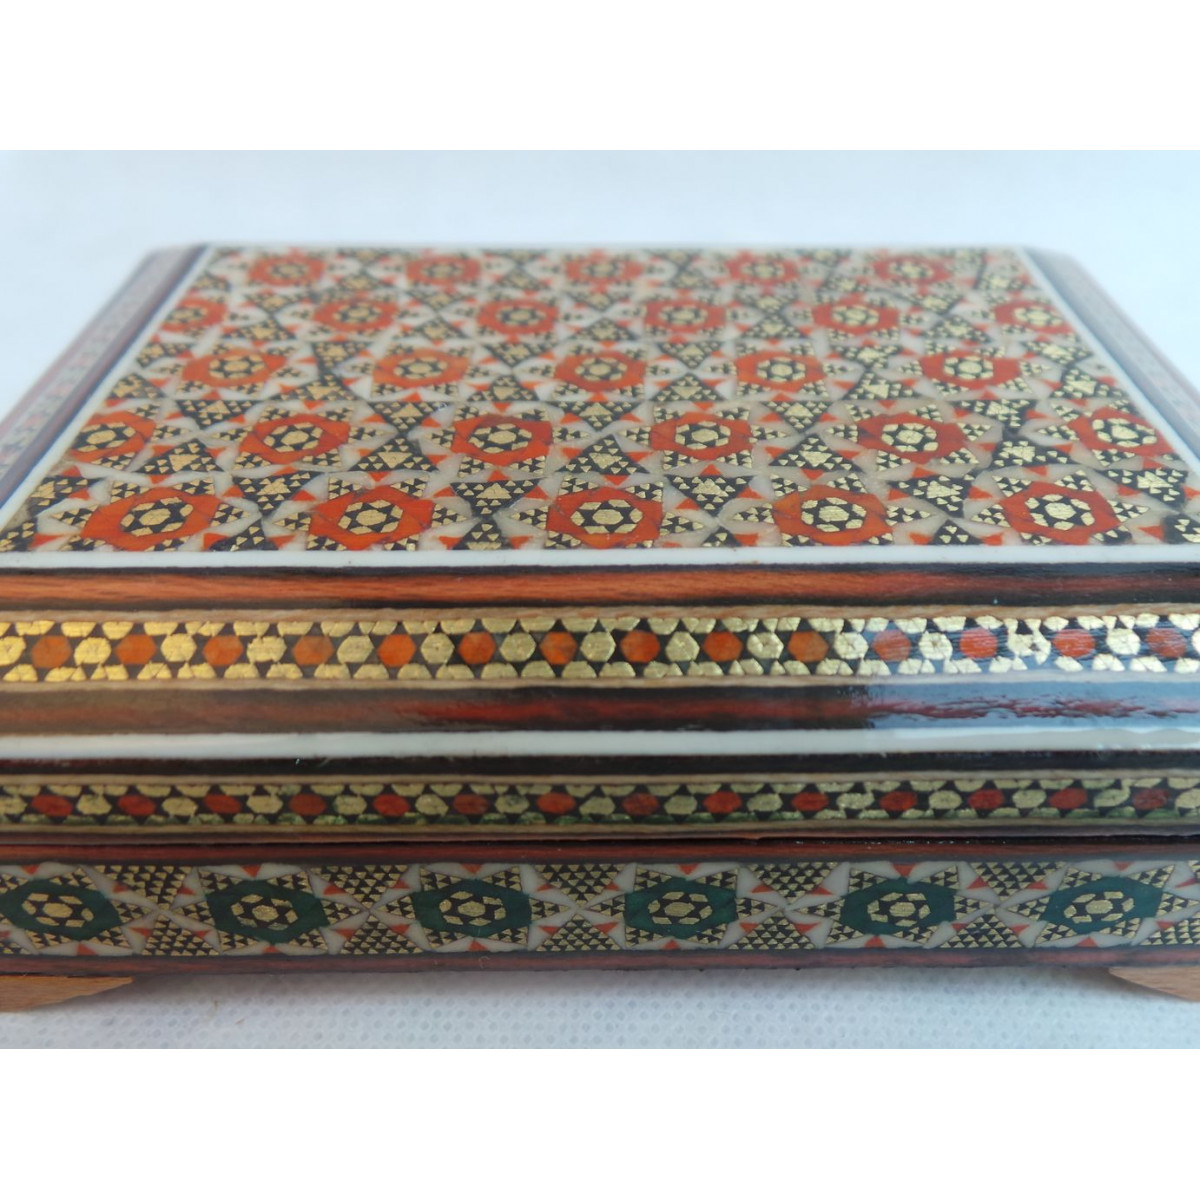 Wood and Copper Inlaying Jewelry Box - HKH3010-Persian Handicrafts